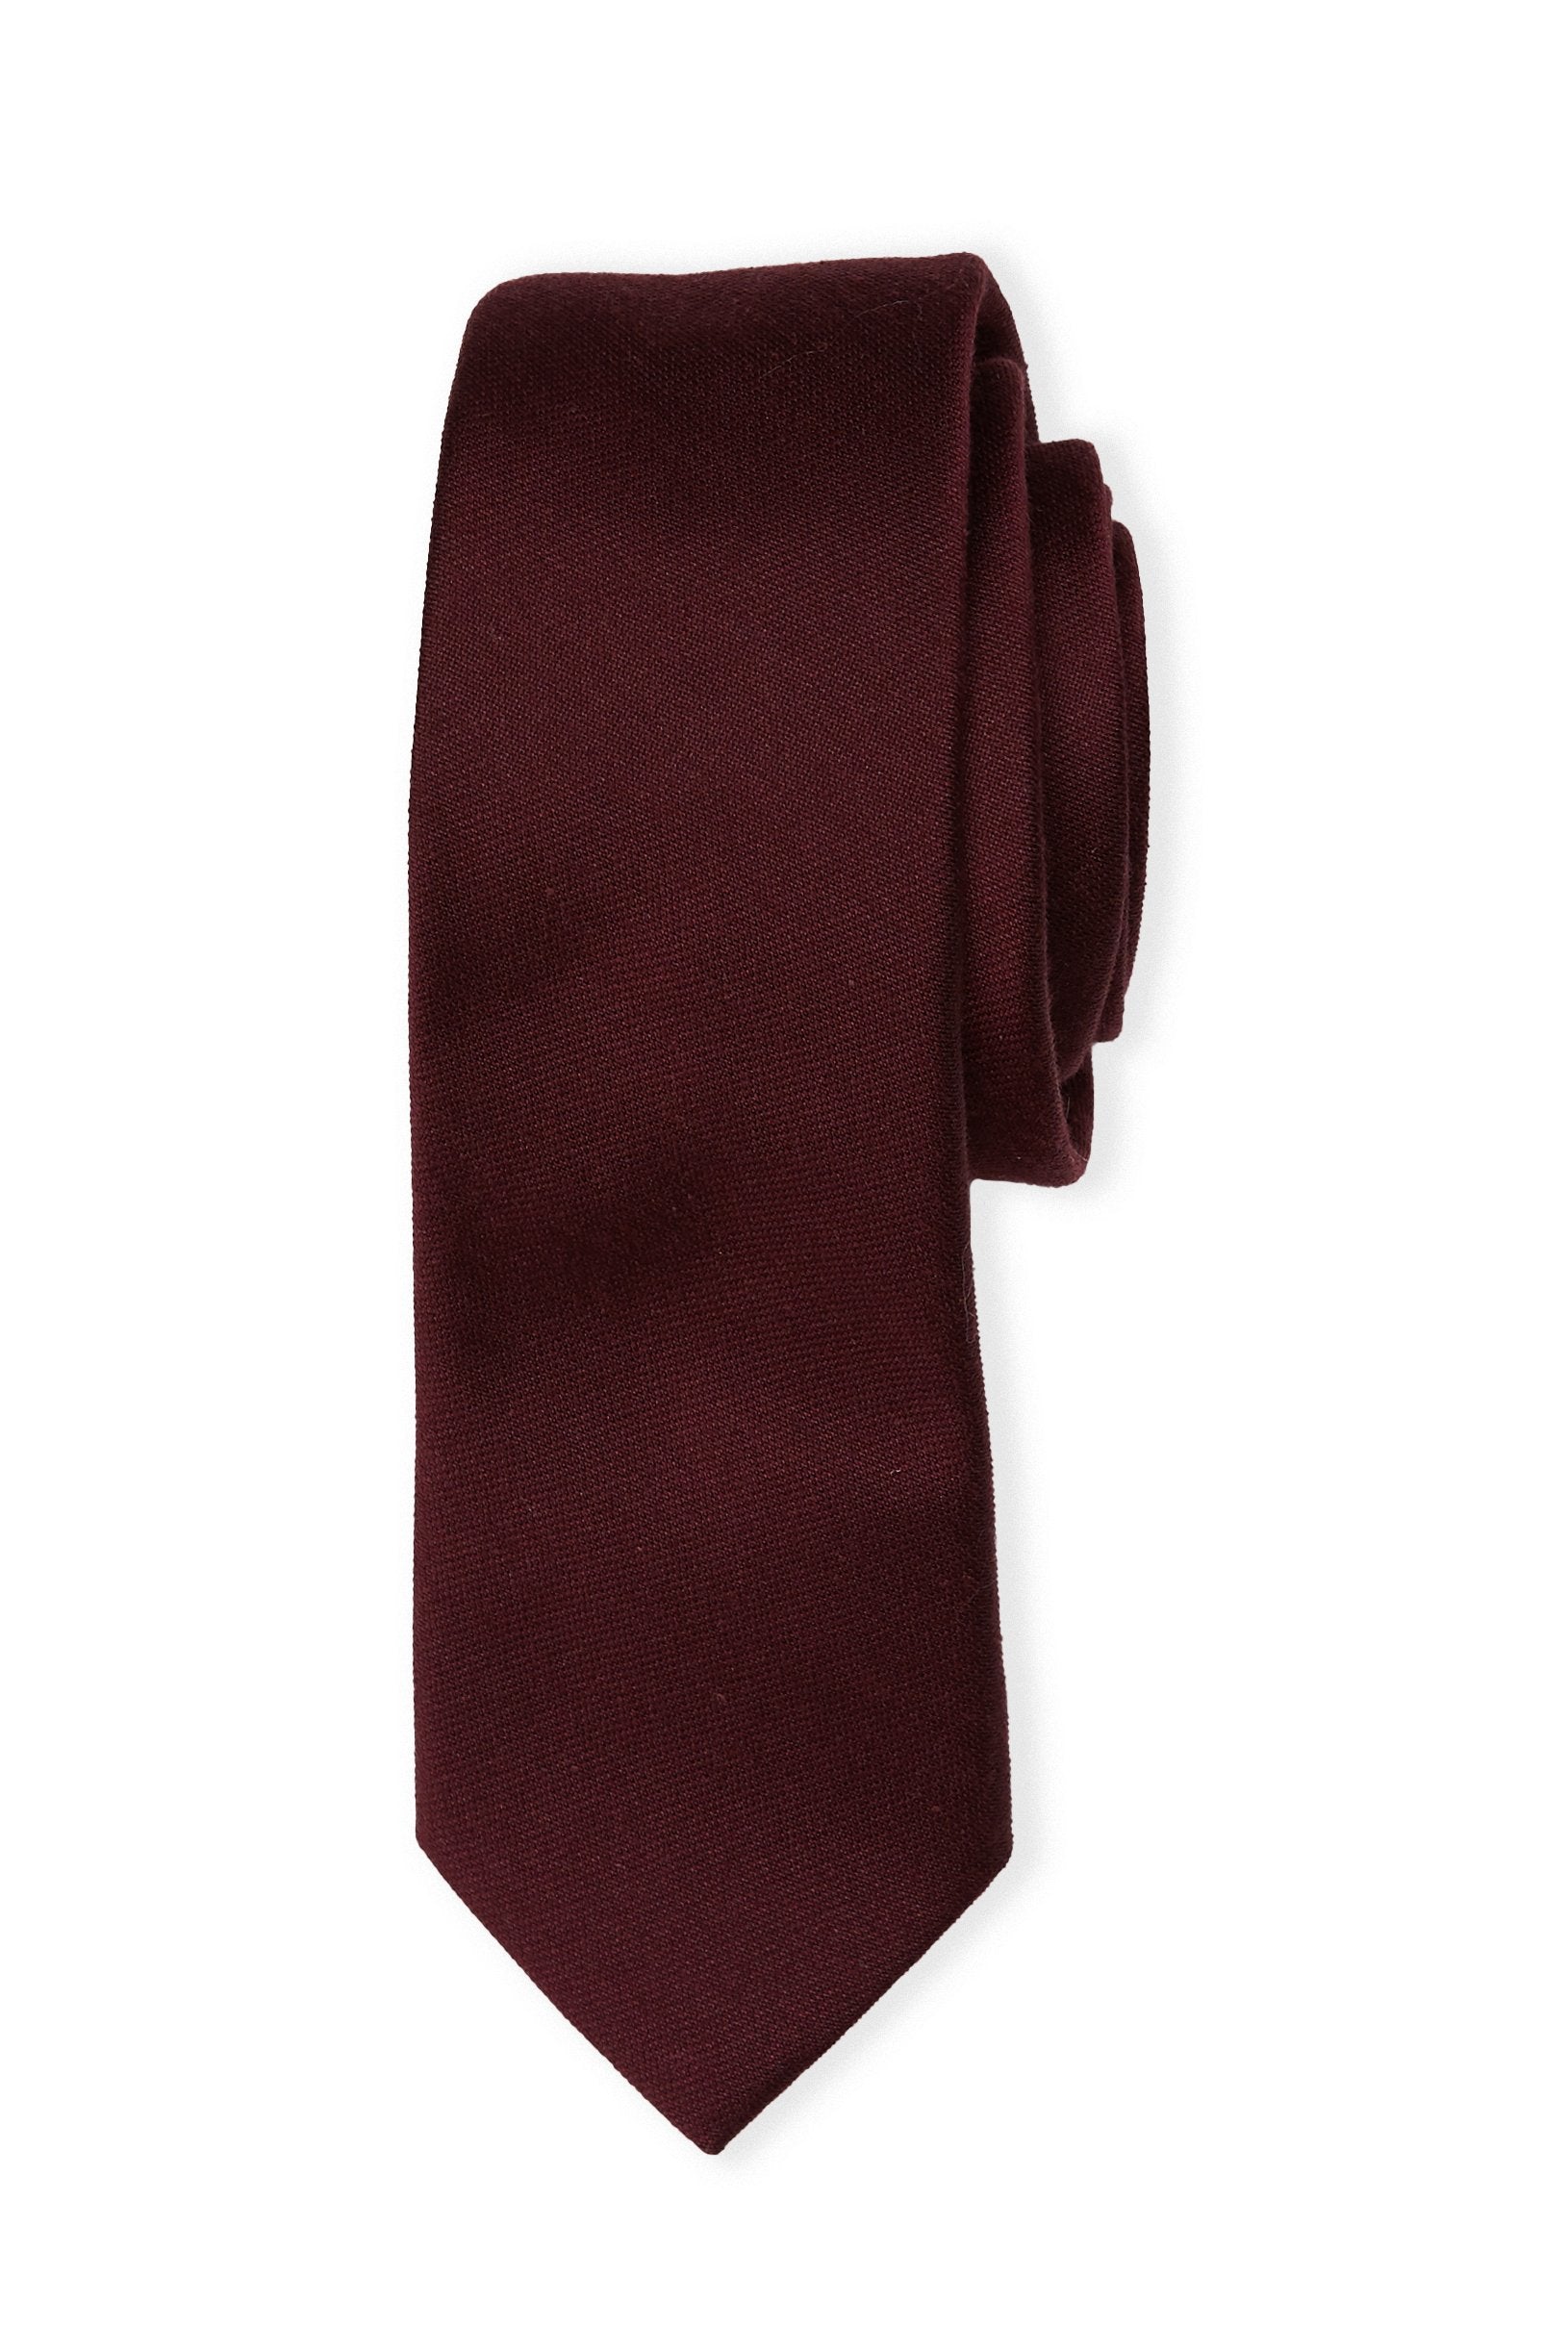 Front close up view of the Simon Necktie in cabernet rolled up with the pointed necktie end extended showing the material texture and sheen.